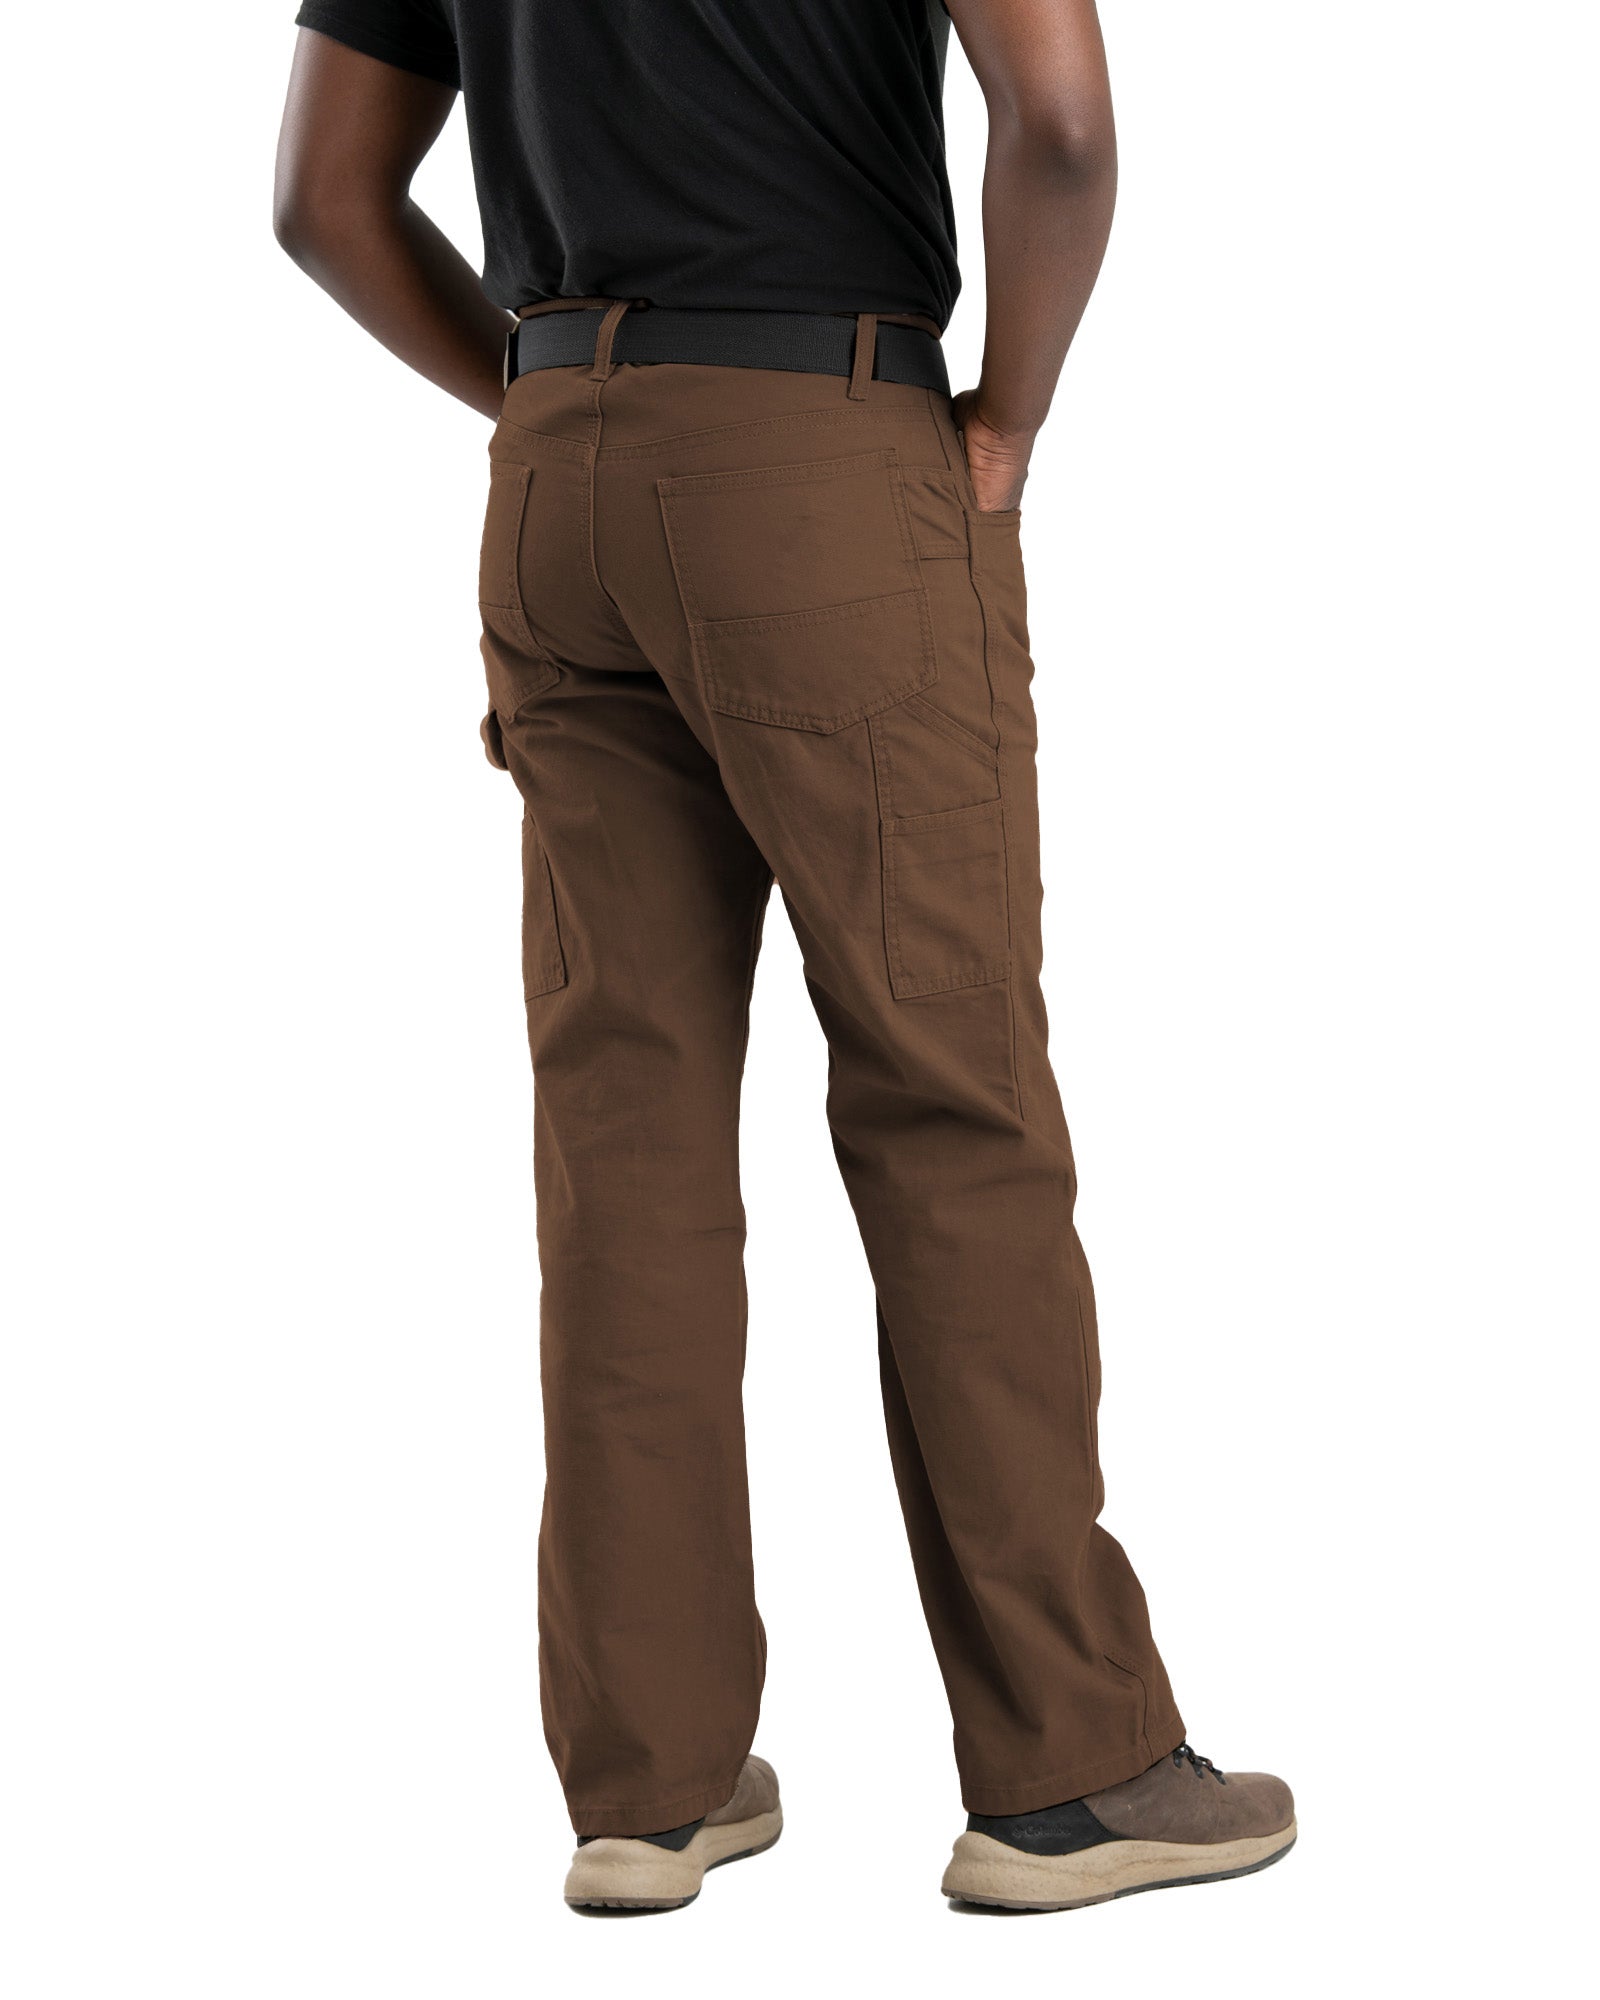 P967BB Heartland Washed Duck Relaxed Fit Carpenter Pant